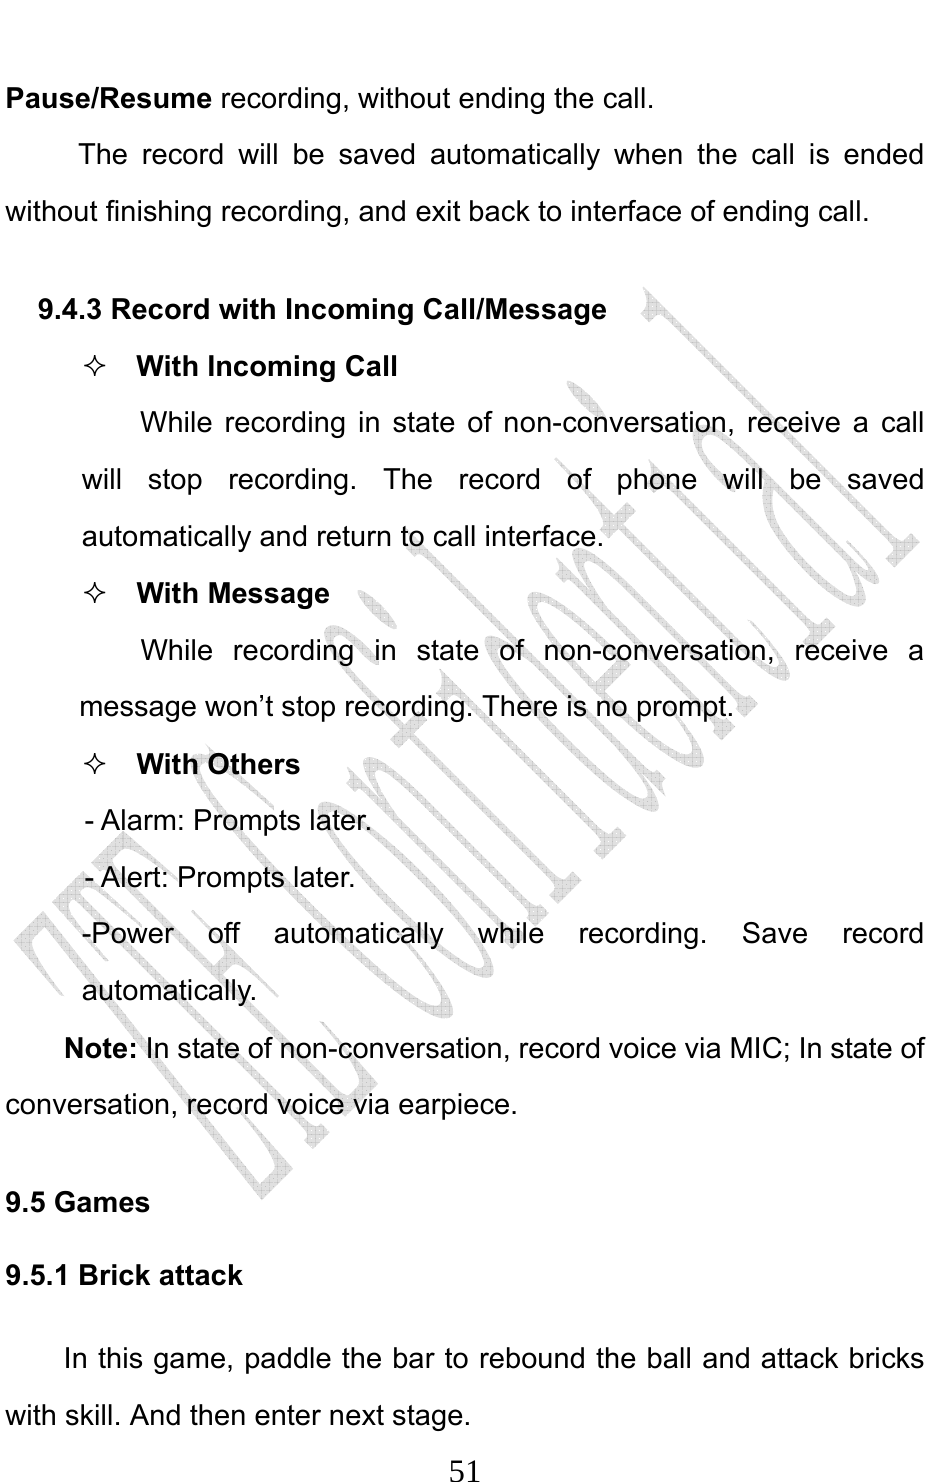                              51Pause/Resume recording, without ending the call. The record will be saved automatically when the call is ended without finishing recording, and exit back to interface of ending call.   9.4.3 Record with Incoming Call/Message  With Incoming Call While recording in state of non-conversation, receive a call will stop recording. The record of phone will be saved automatically and return to call interface.  With Message While recording in state of non-conversation, receive a message won’t stop recording. There is no prompt.    With Others - Alarm: Prompts later. - Alert: Prompts later. -Power off automatically while recording. Save record automatically. Note: In state of non-conversation, record voice via MIC; In state of conversation, record voice via earpiece. 9.5 Games 9.5.1 Brick attack In this game, paddle the bar to rebound the ball and attack bricks with skill. And then enter next stage. 